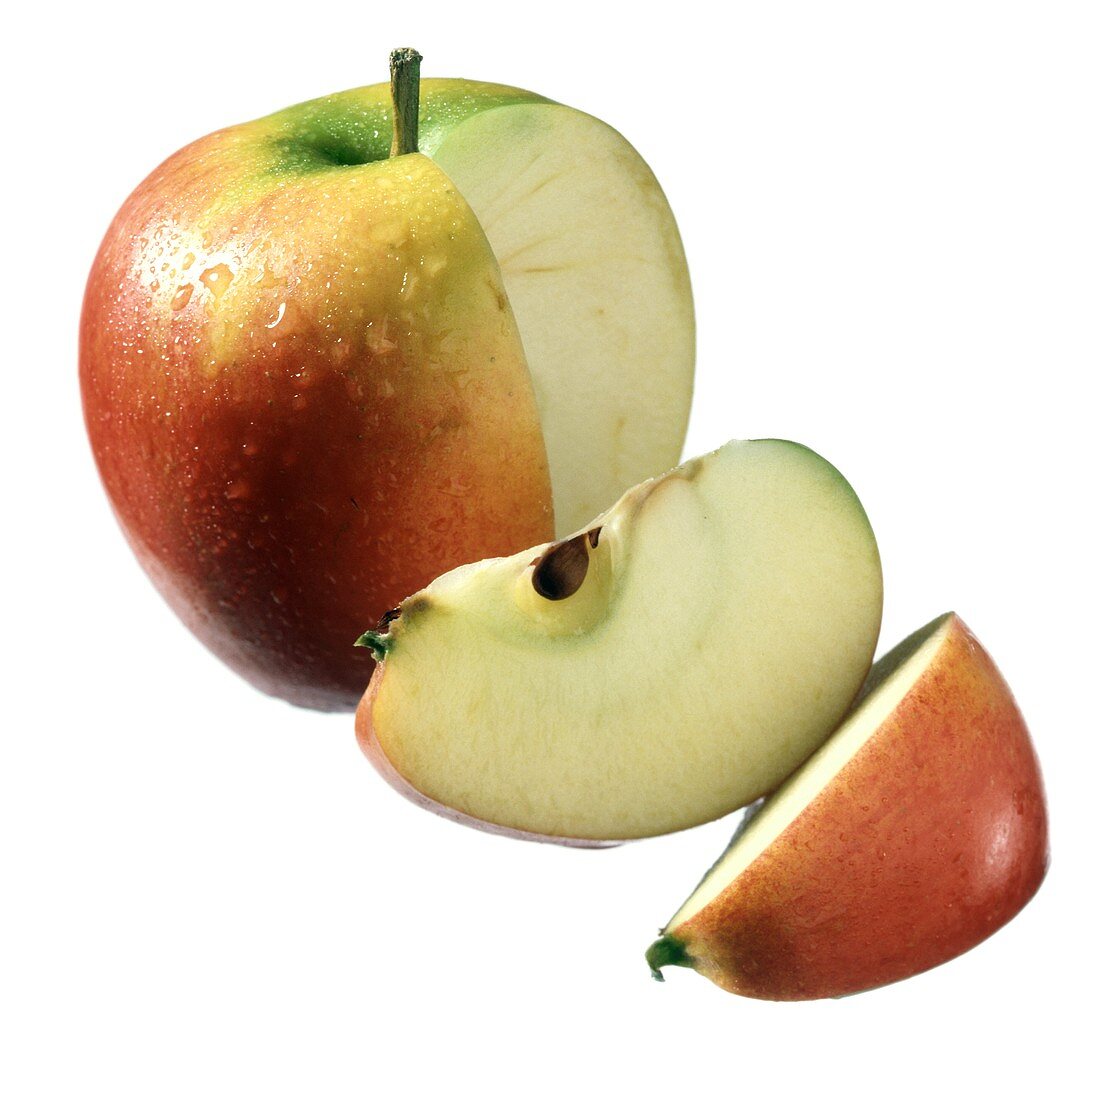 Gala Apple with Two Slices